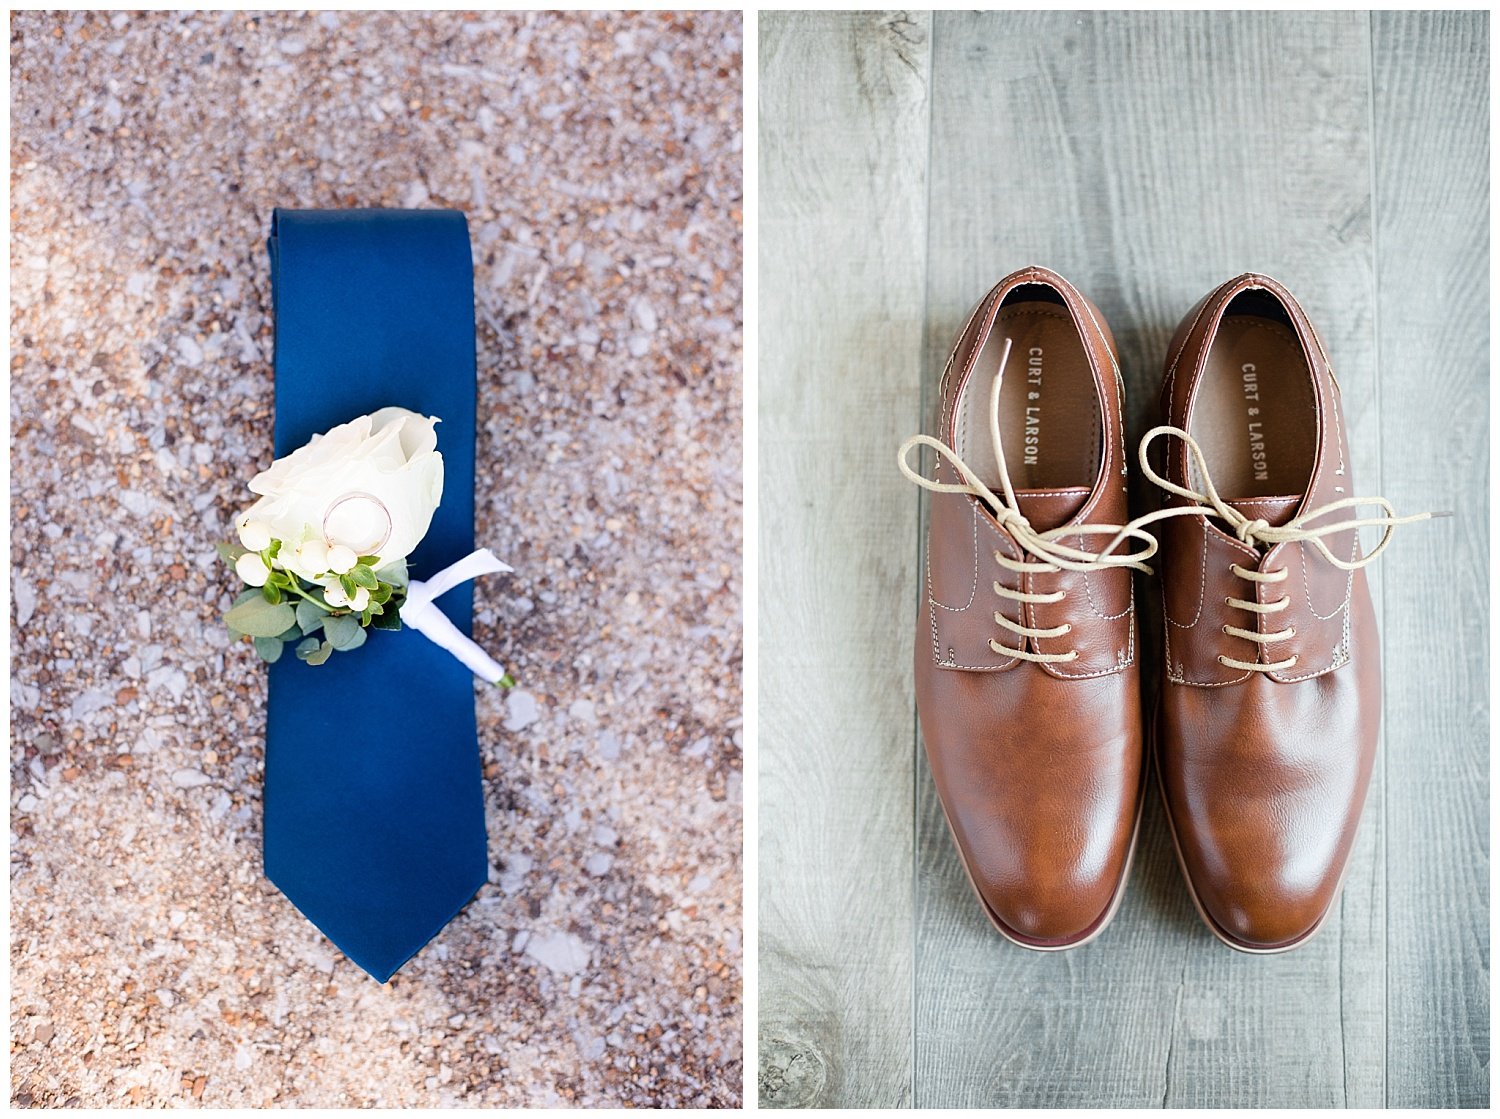 groom wedding details on concrete and wood at Patten Chapel at UTC in Chattanooga